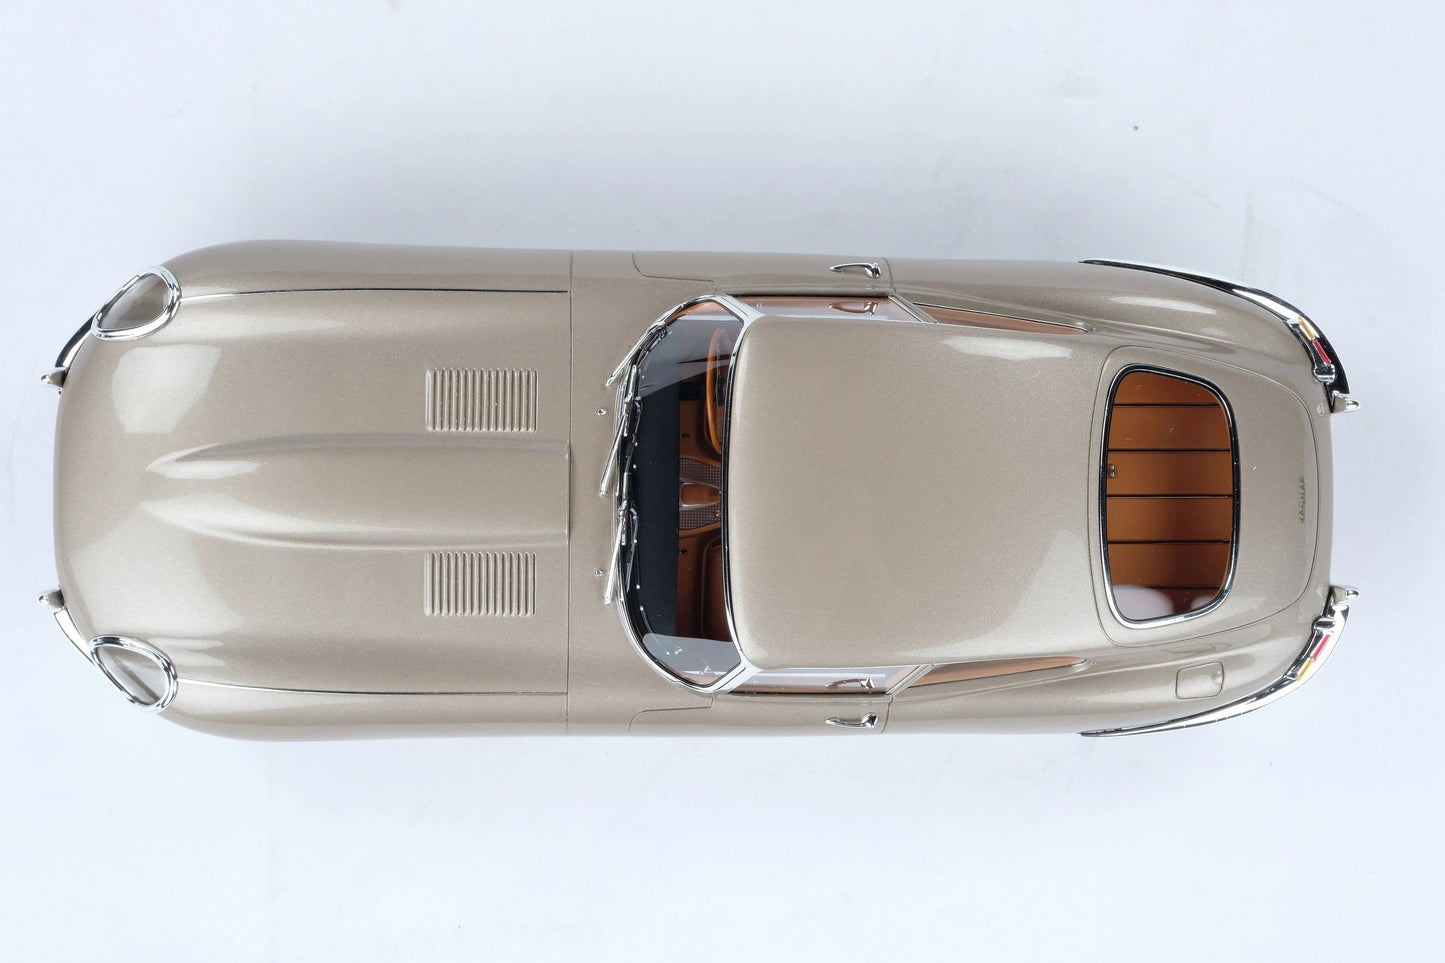 Jaguar E-type Coupe by  Amalgam Collection |  Time Keeper.